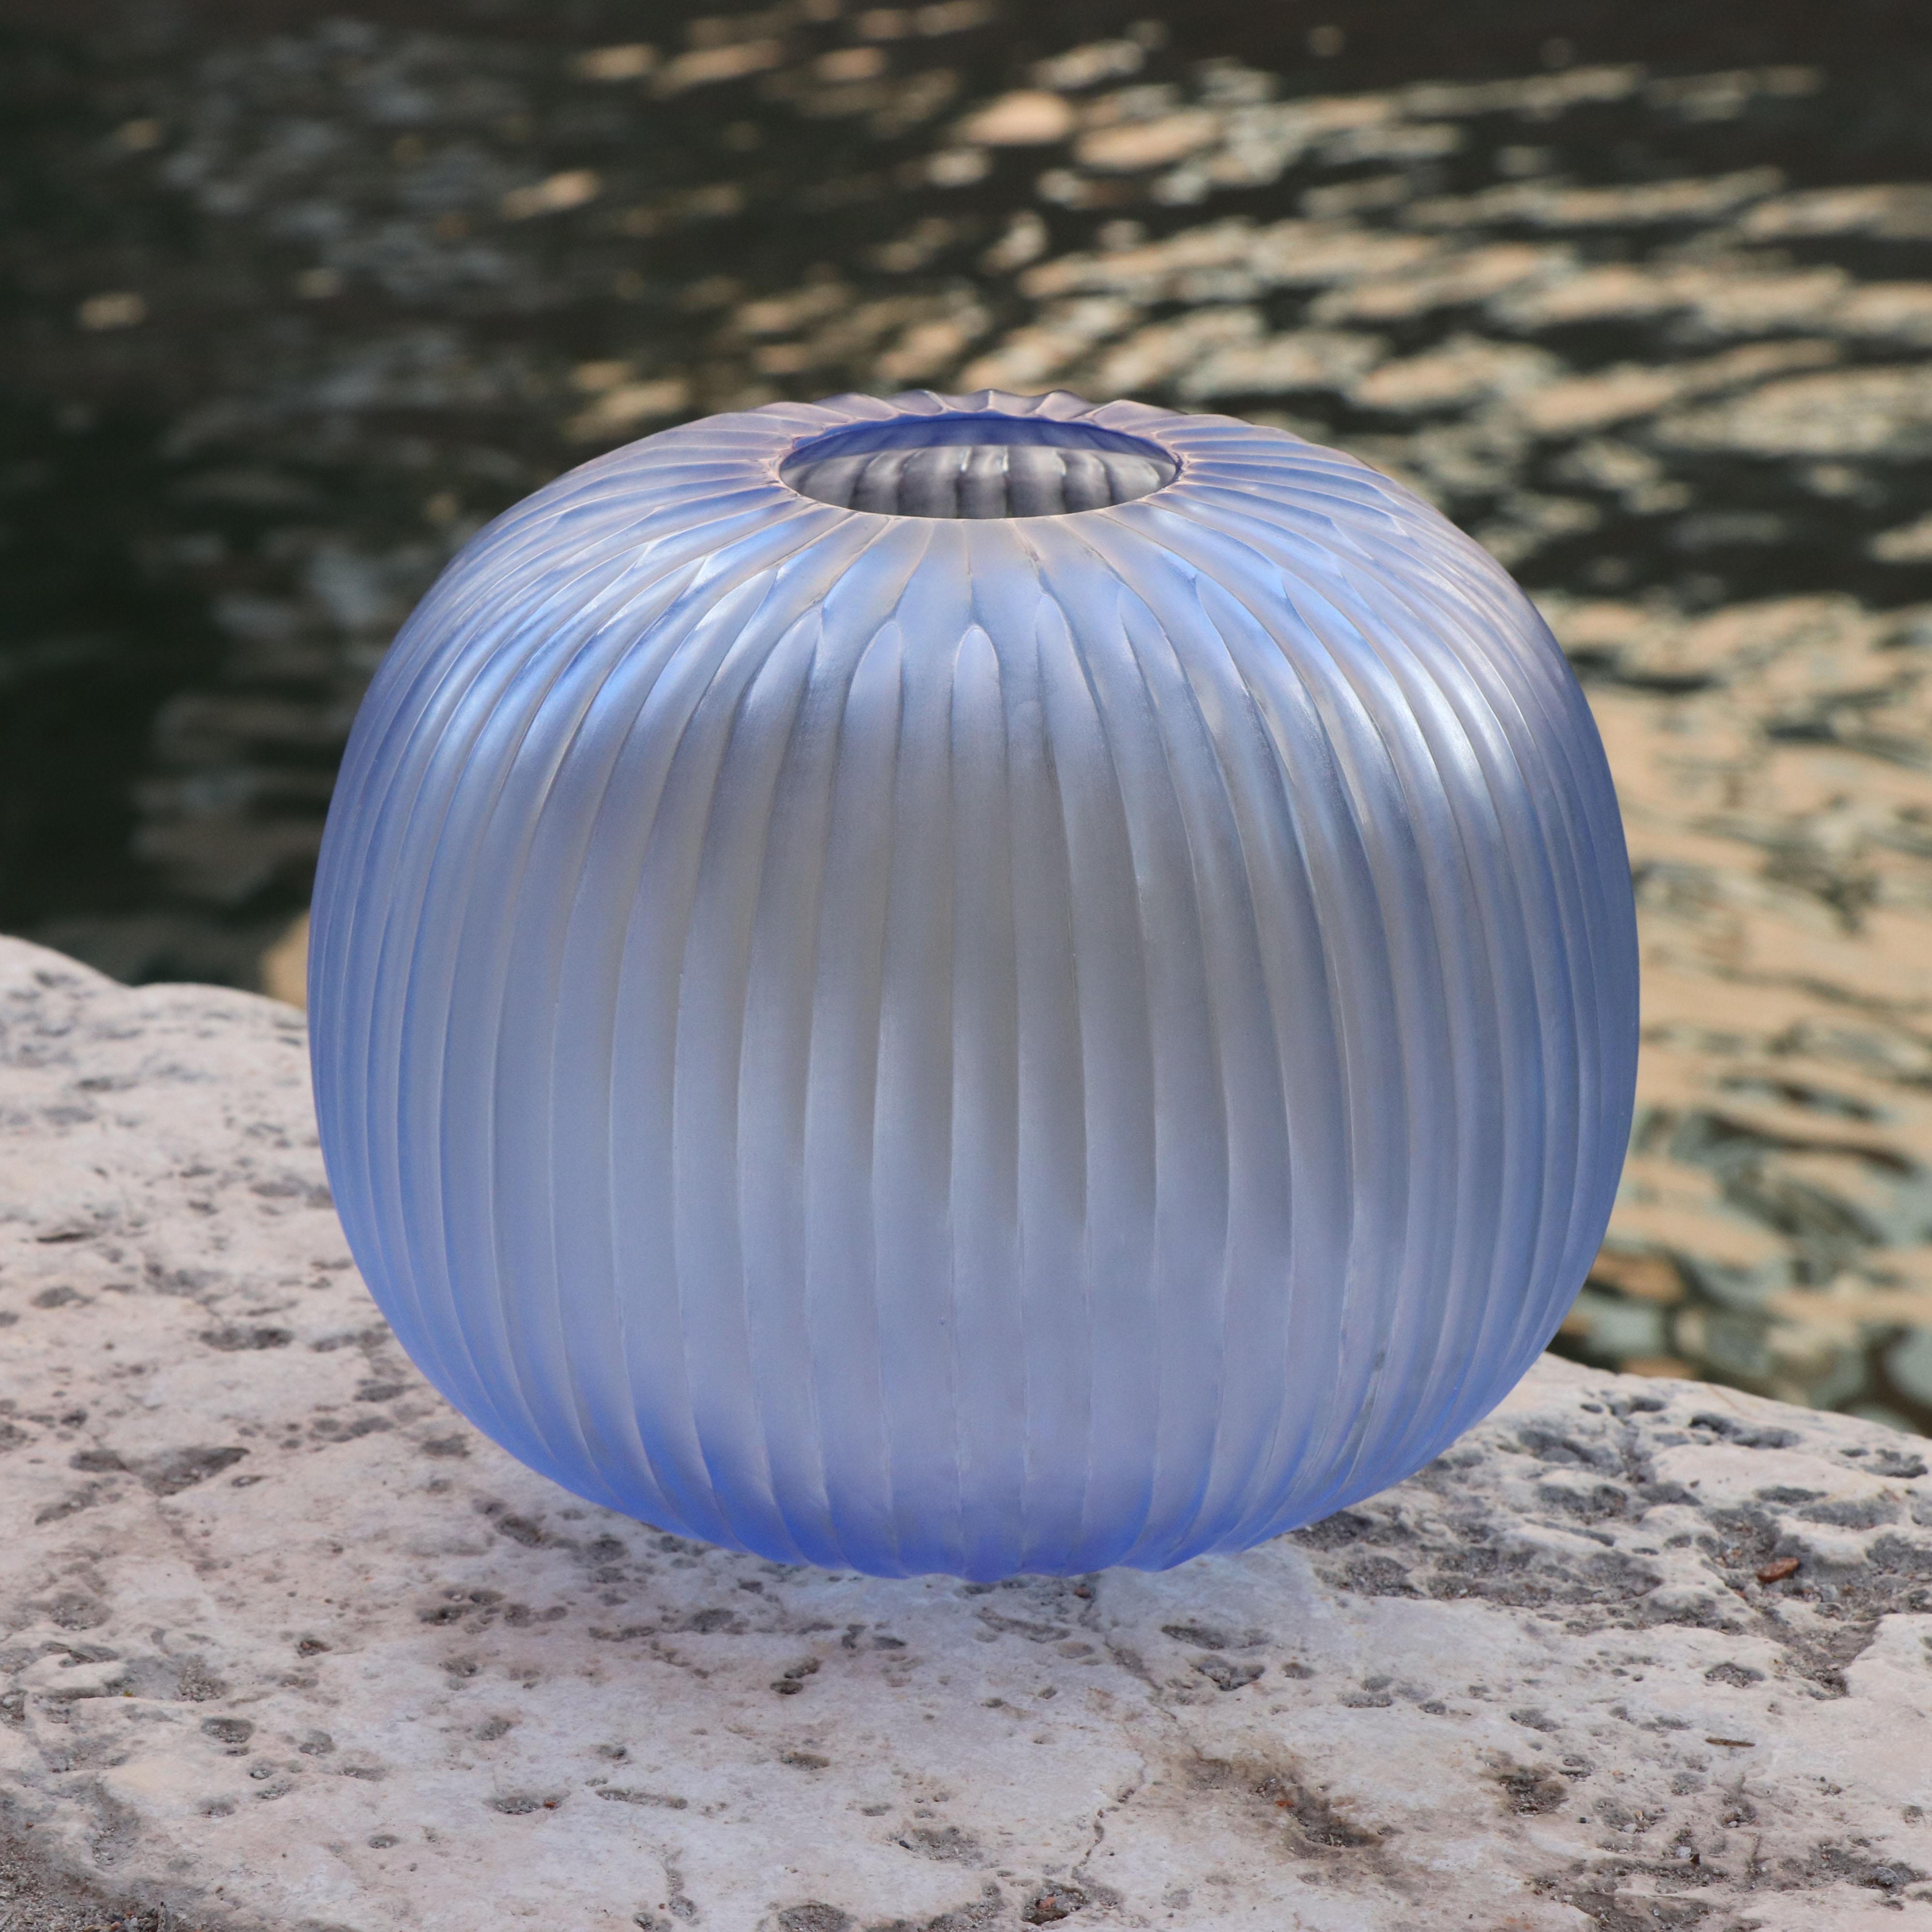 The melted glass is first blown in the heat of the furnace and shaped into a round vase with a small opening. Once solid the glass is cold carved to produce the linear cuts which mark its surface reminding us of the shell of a sea urchin –